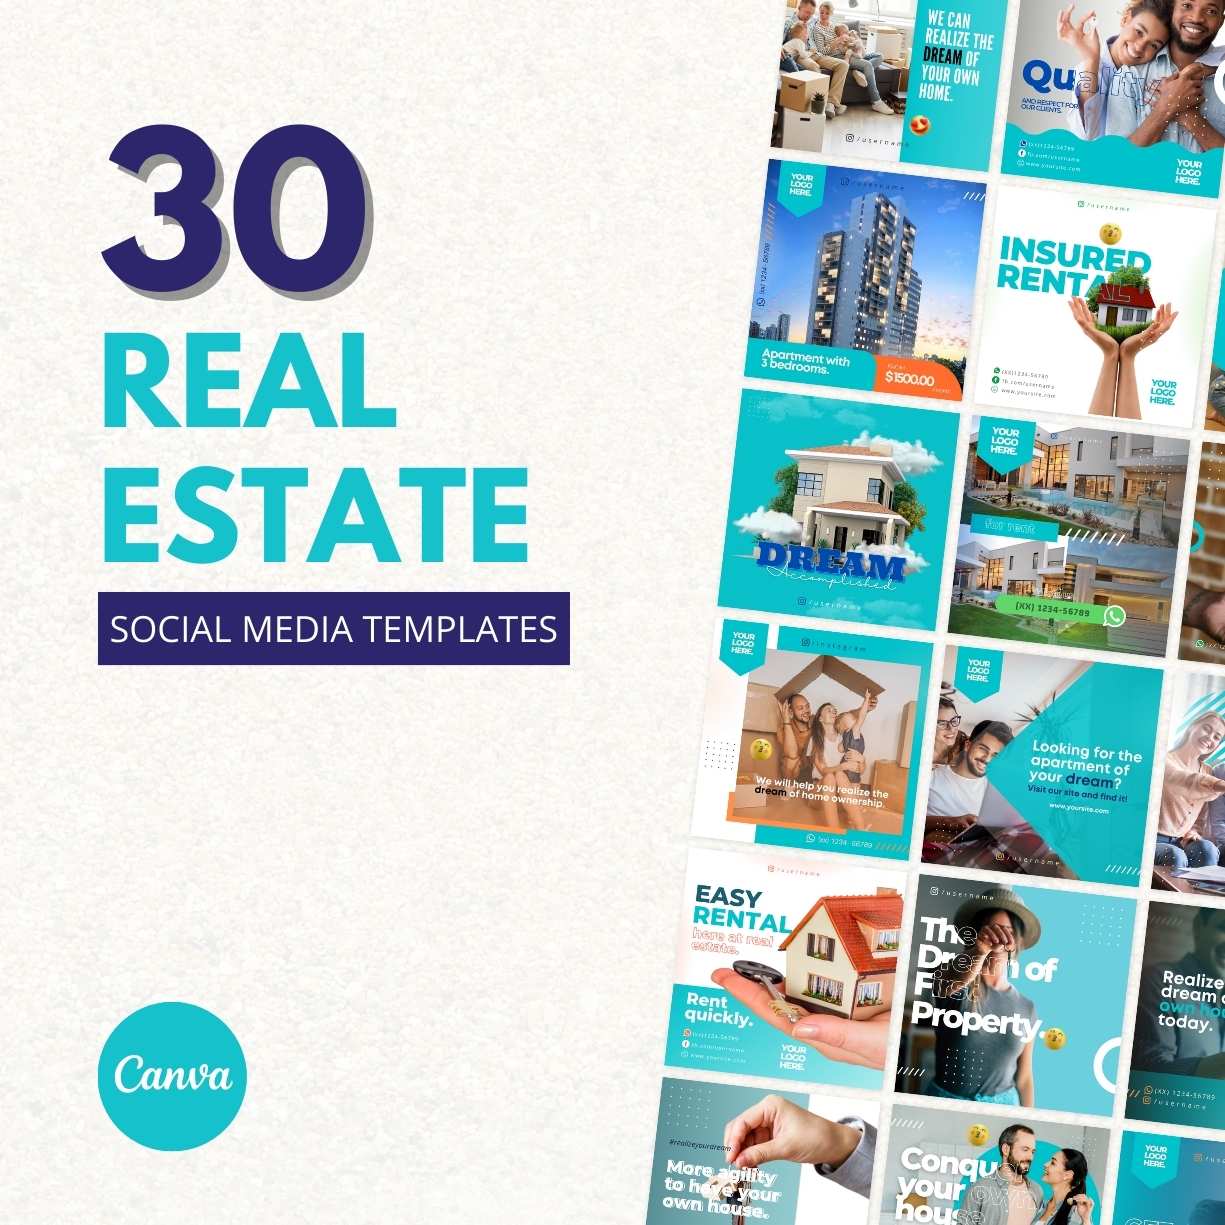 30 Real Estate Canva Templates For Social Media cover image.